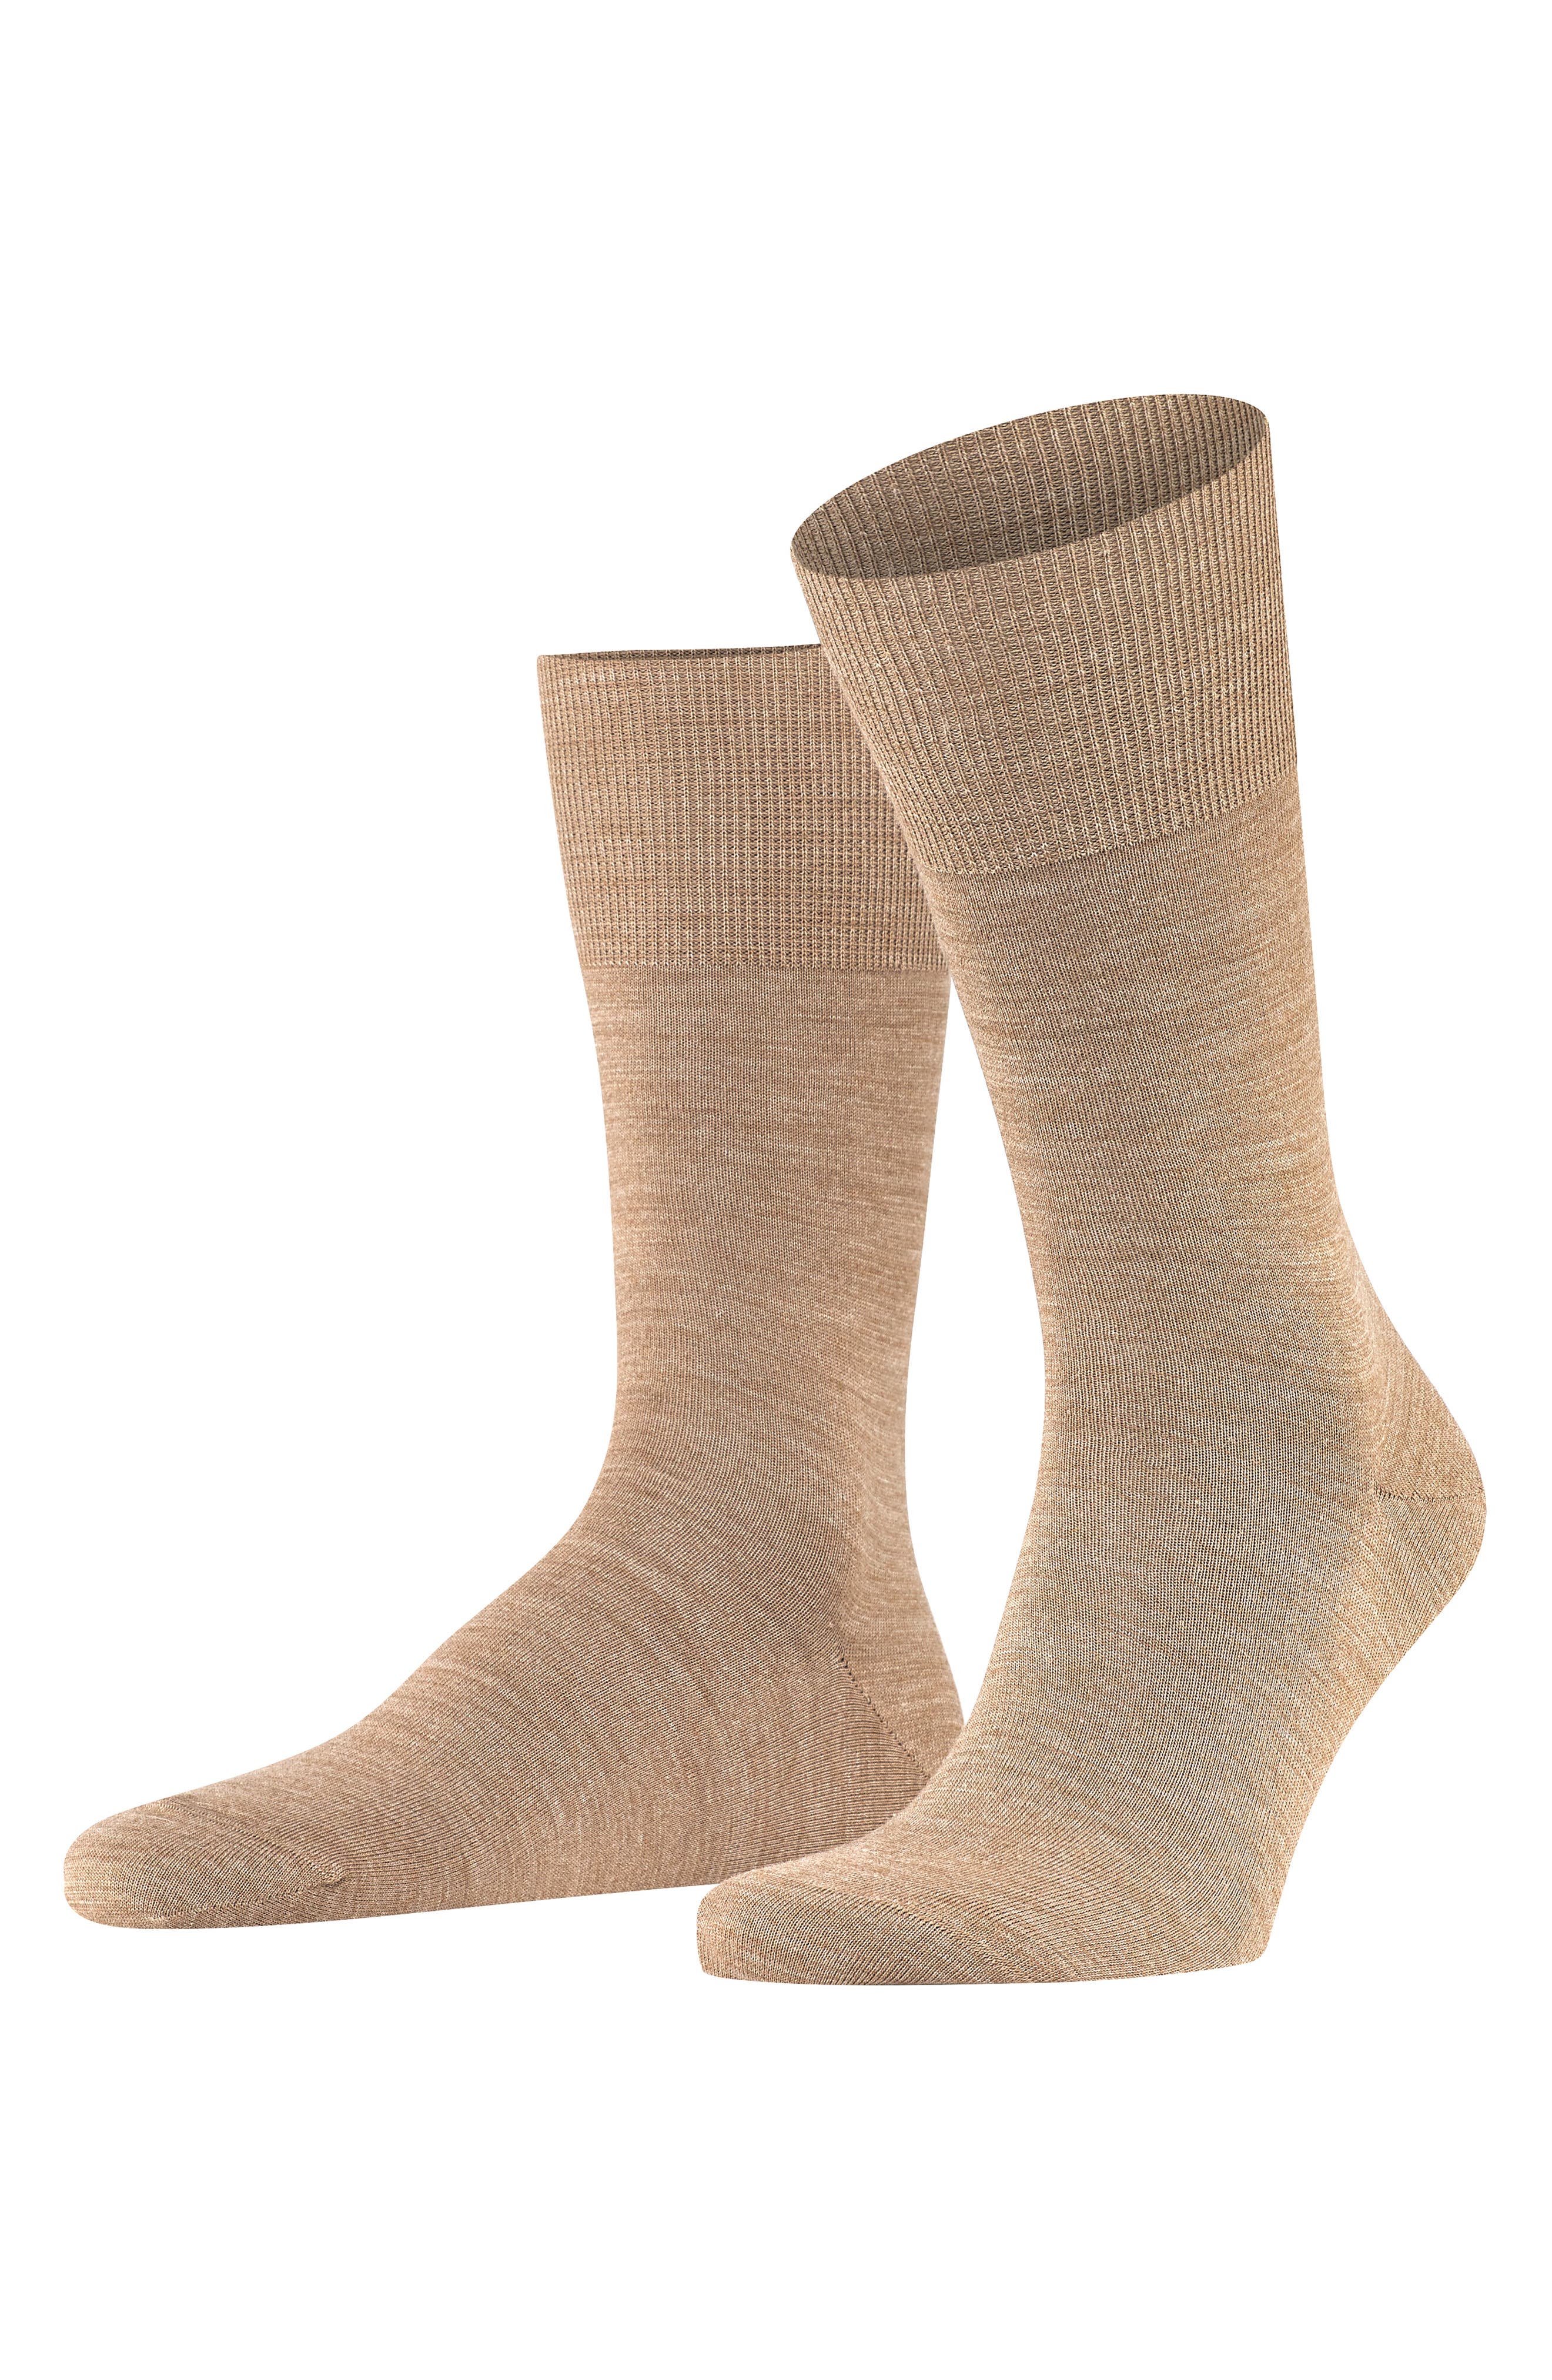 1 Pair Merino Wool/Cotton Blend Warm pressure-free toe area UK sizes 5.5-14 thermo-regulating FALKE Men Airport Socks Multiple Colours ideal for any occasion EU 39-50 